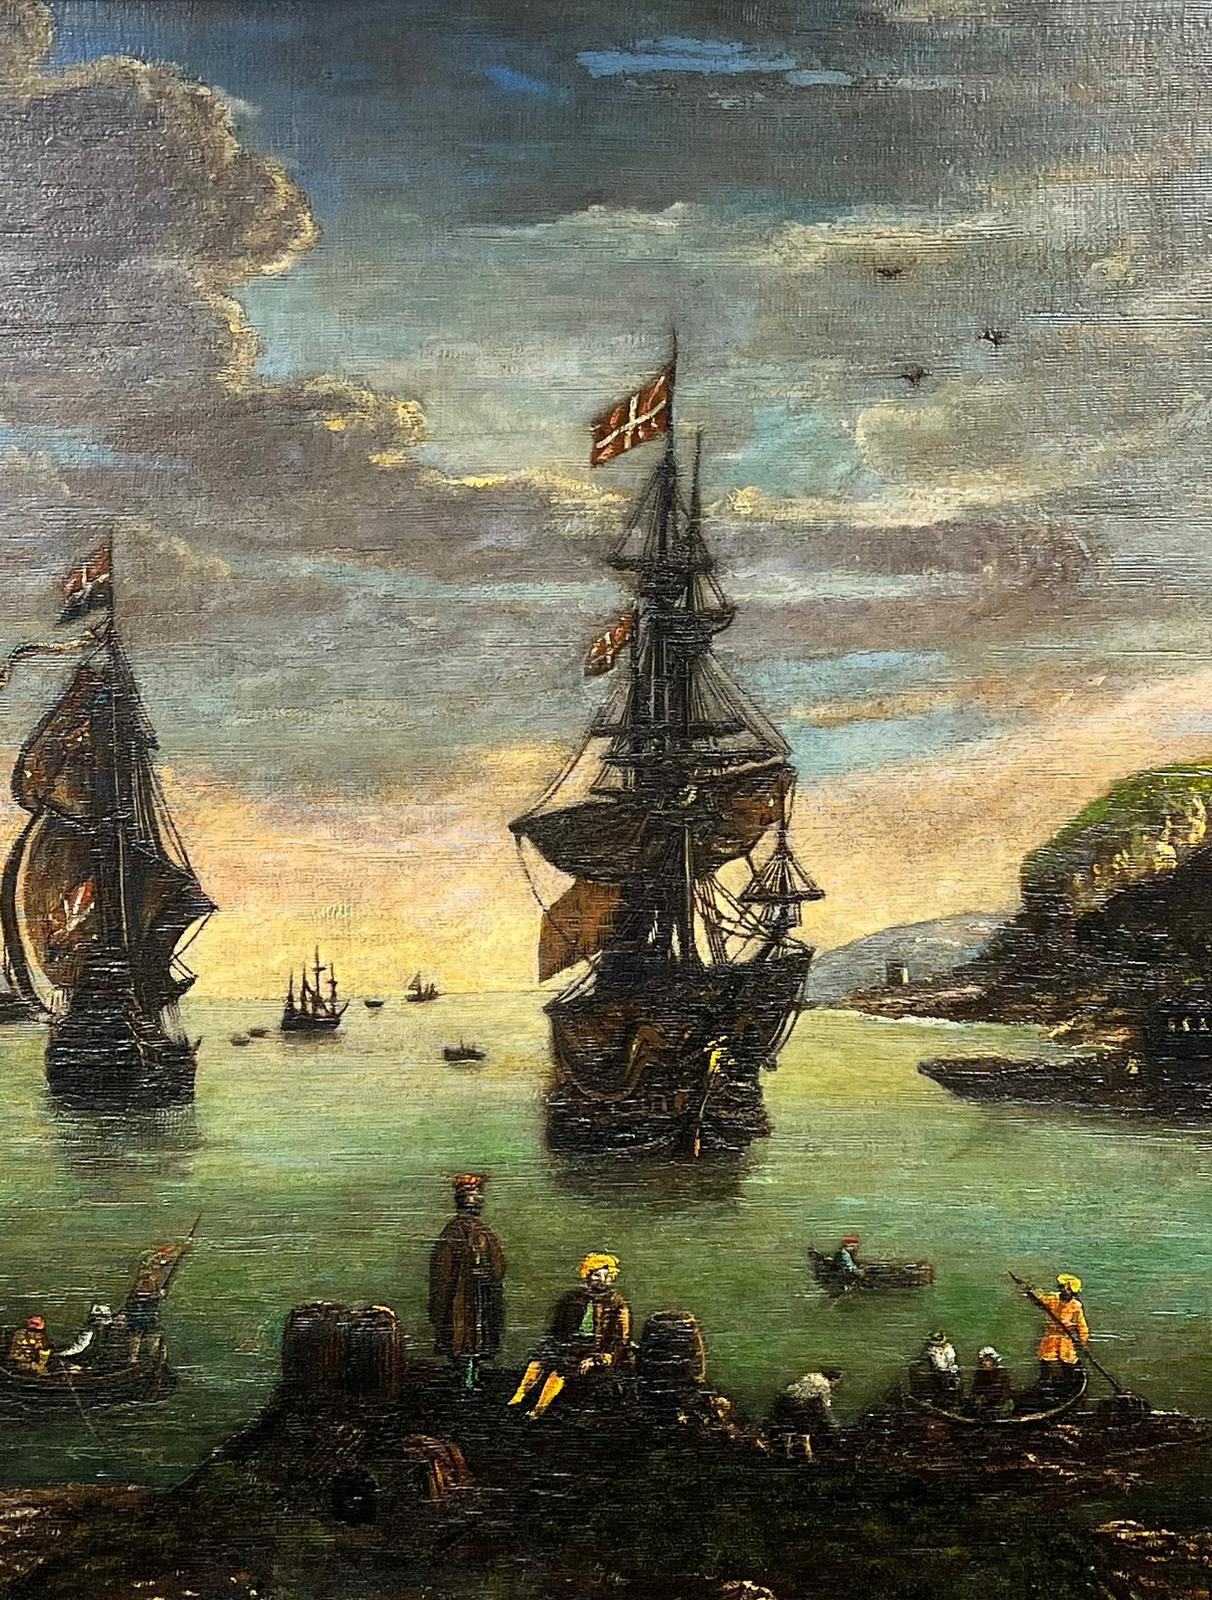 Tall ships in a rocky bay, with figures in Eastern costume in boats and on the shoreline
19th Century School
oil on canvas, framed
framed: 39.5 x 36 inches
canvas: 34 x 30 inches
the painting is in overall good and sound condition though does have